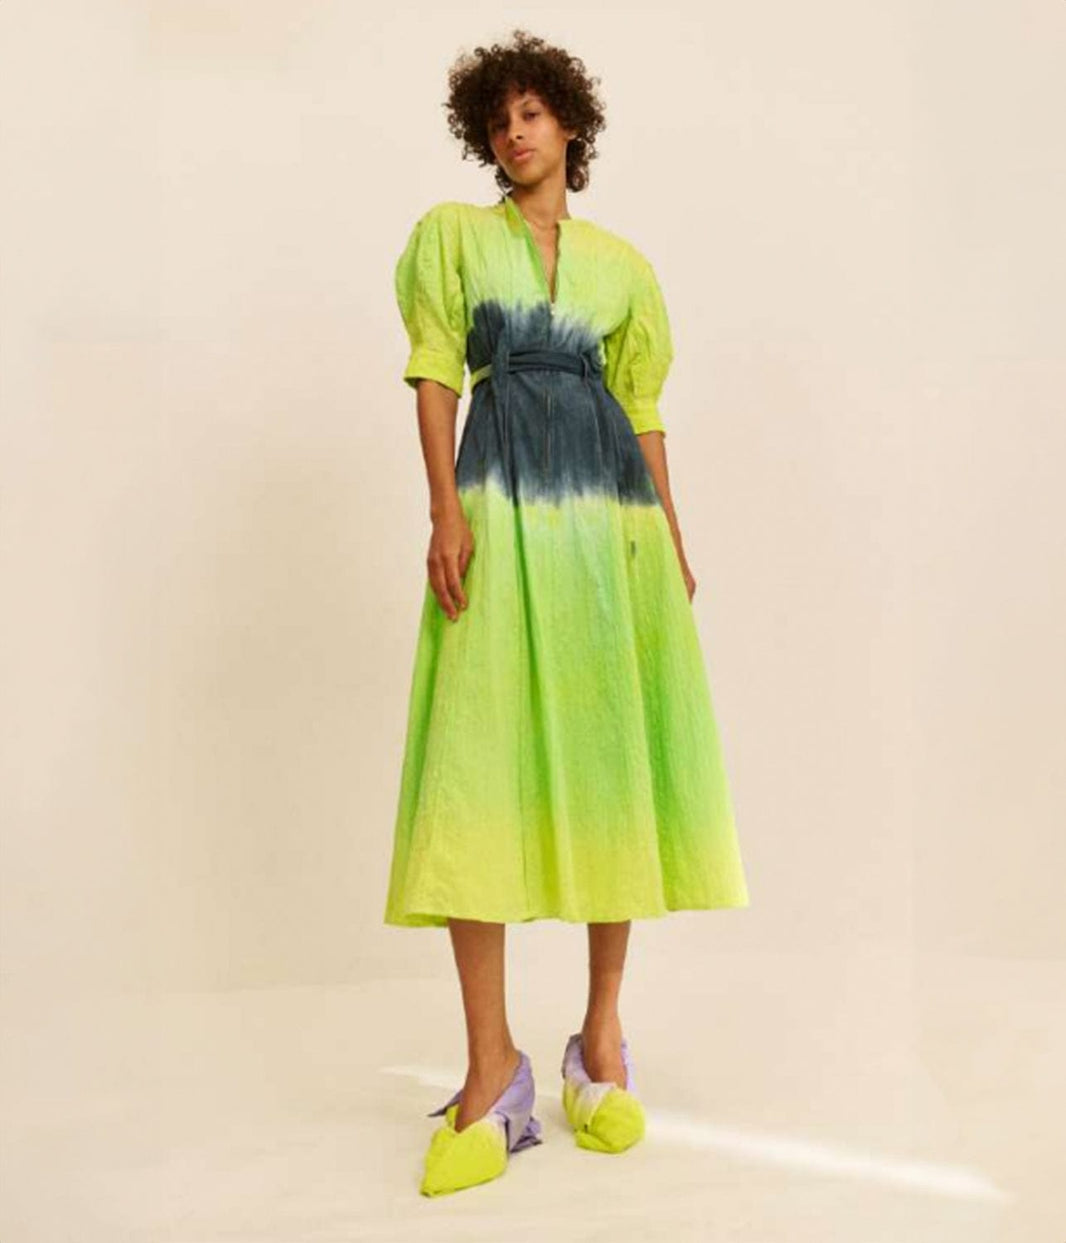 DRESSES – FOR ARTISTS ONLY